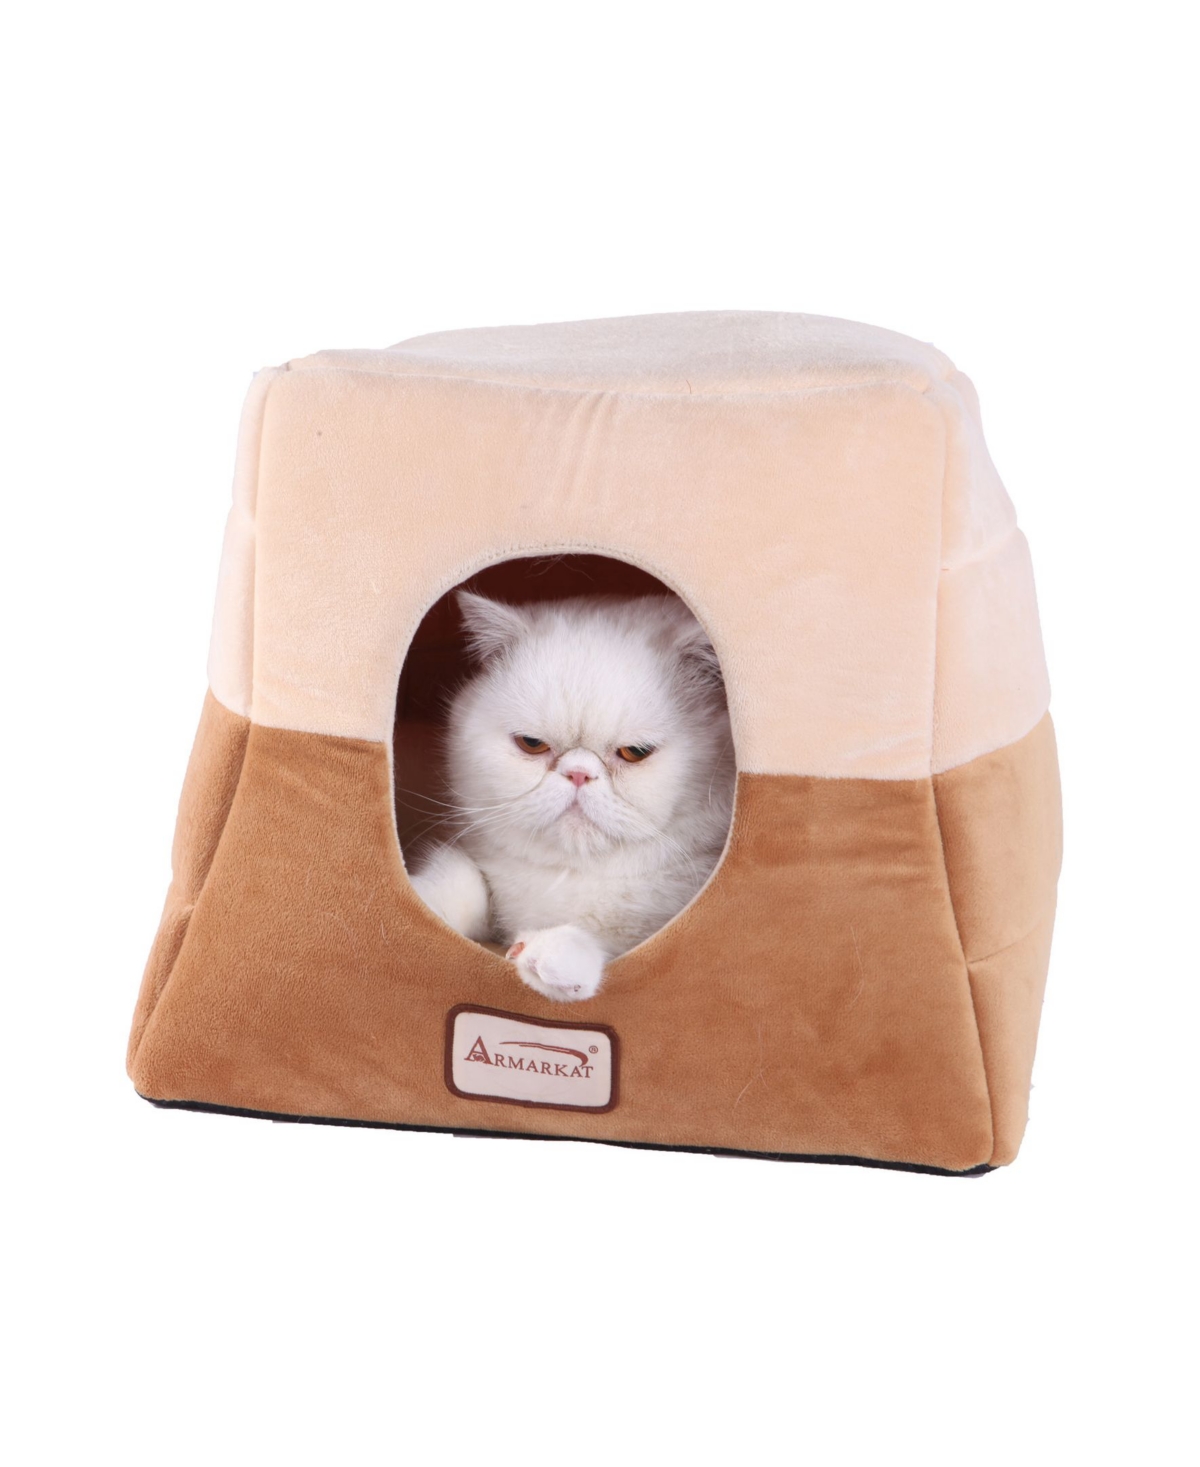 2-In-1 Cat Bed Cave Shape and Cuddle Pet Bed - Brown